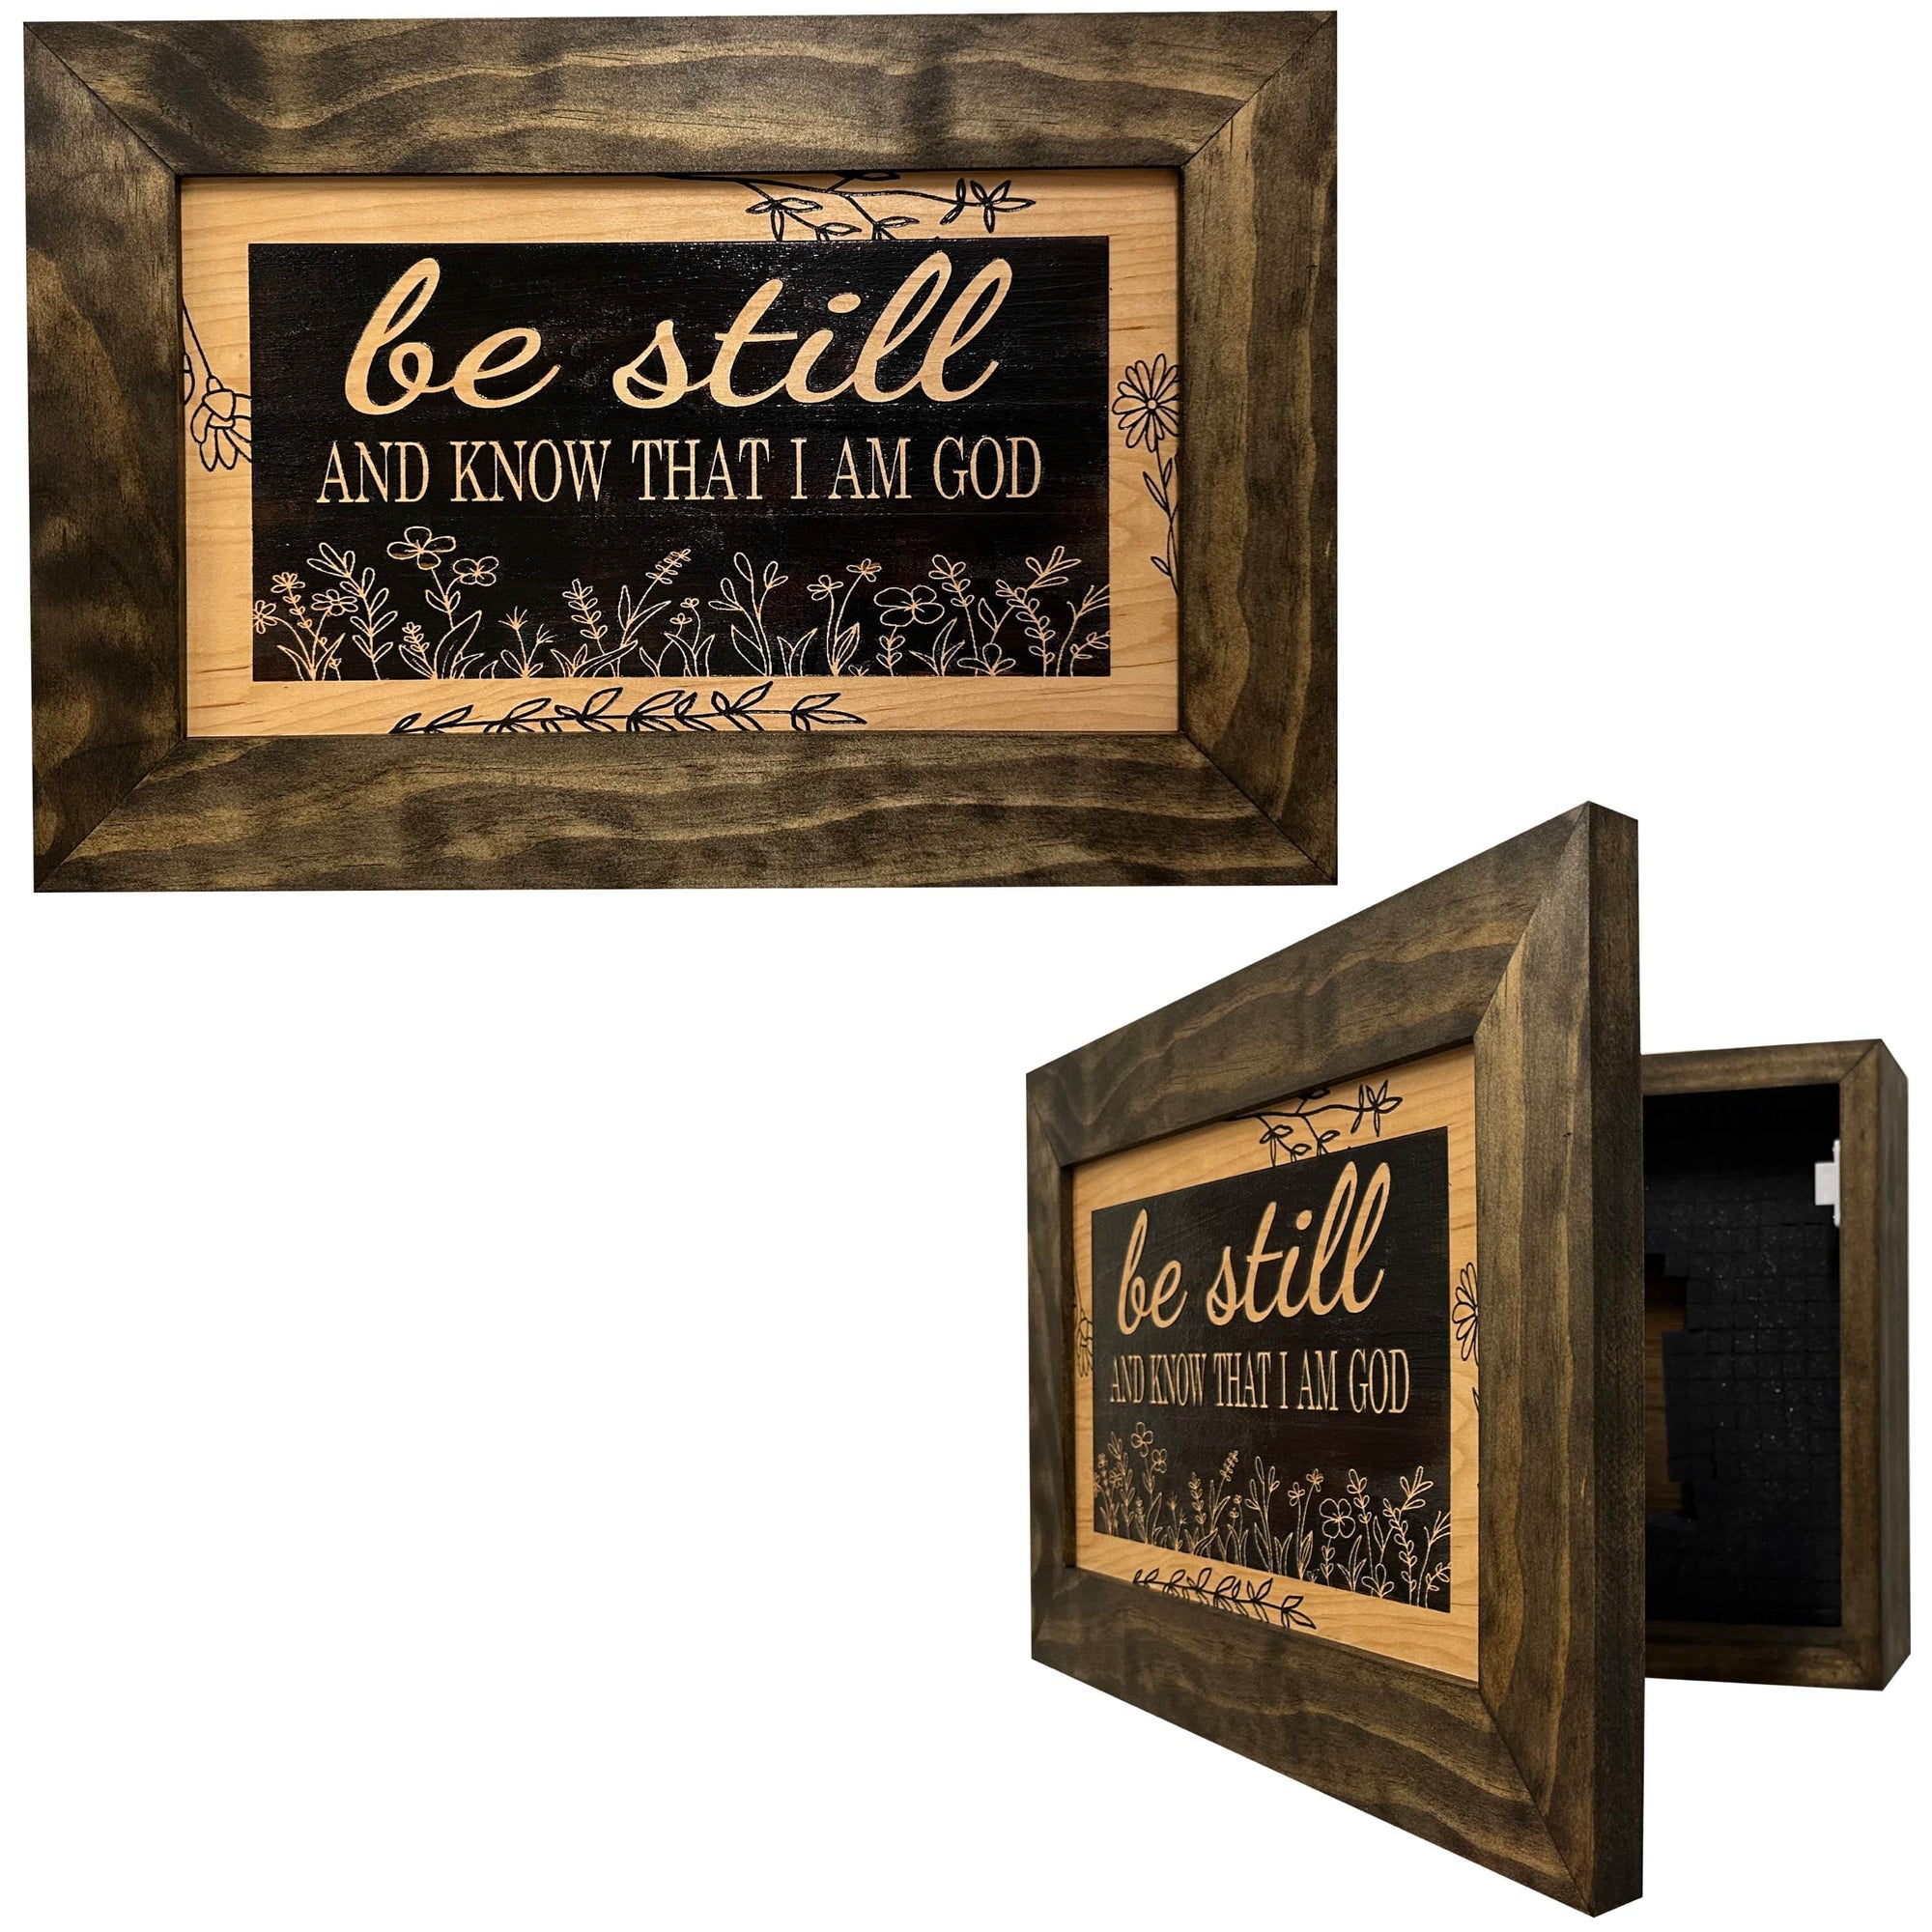 Bible Verse Decorative & Secure Wall-Mounted Gun Cabinet - Be Still and Know That I am God Psalm 46:10 Gun Safe Armadillo Safe and Vault